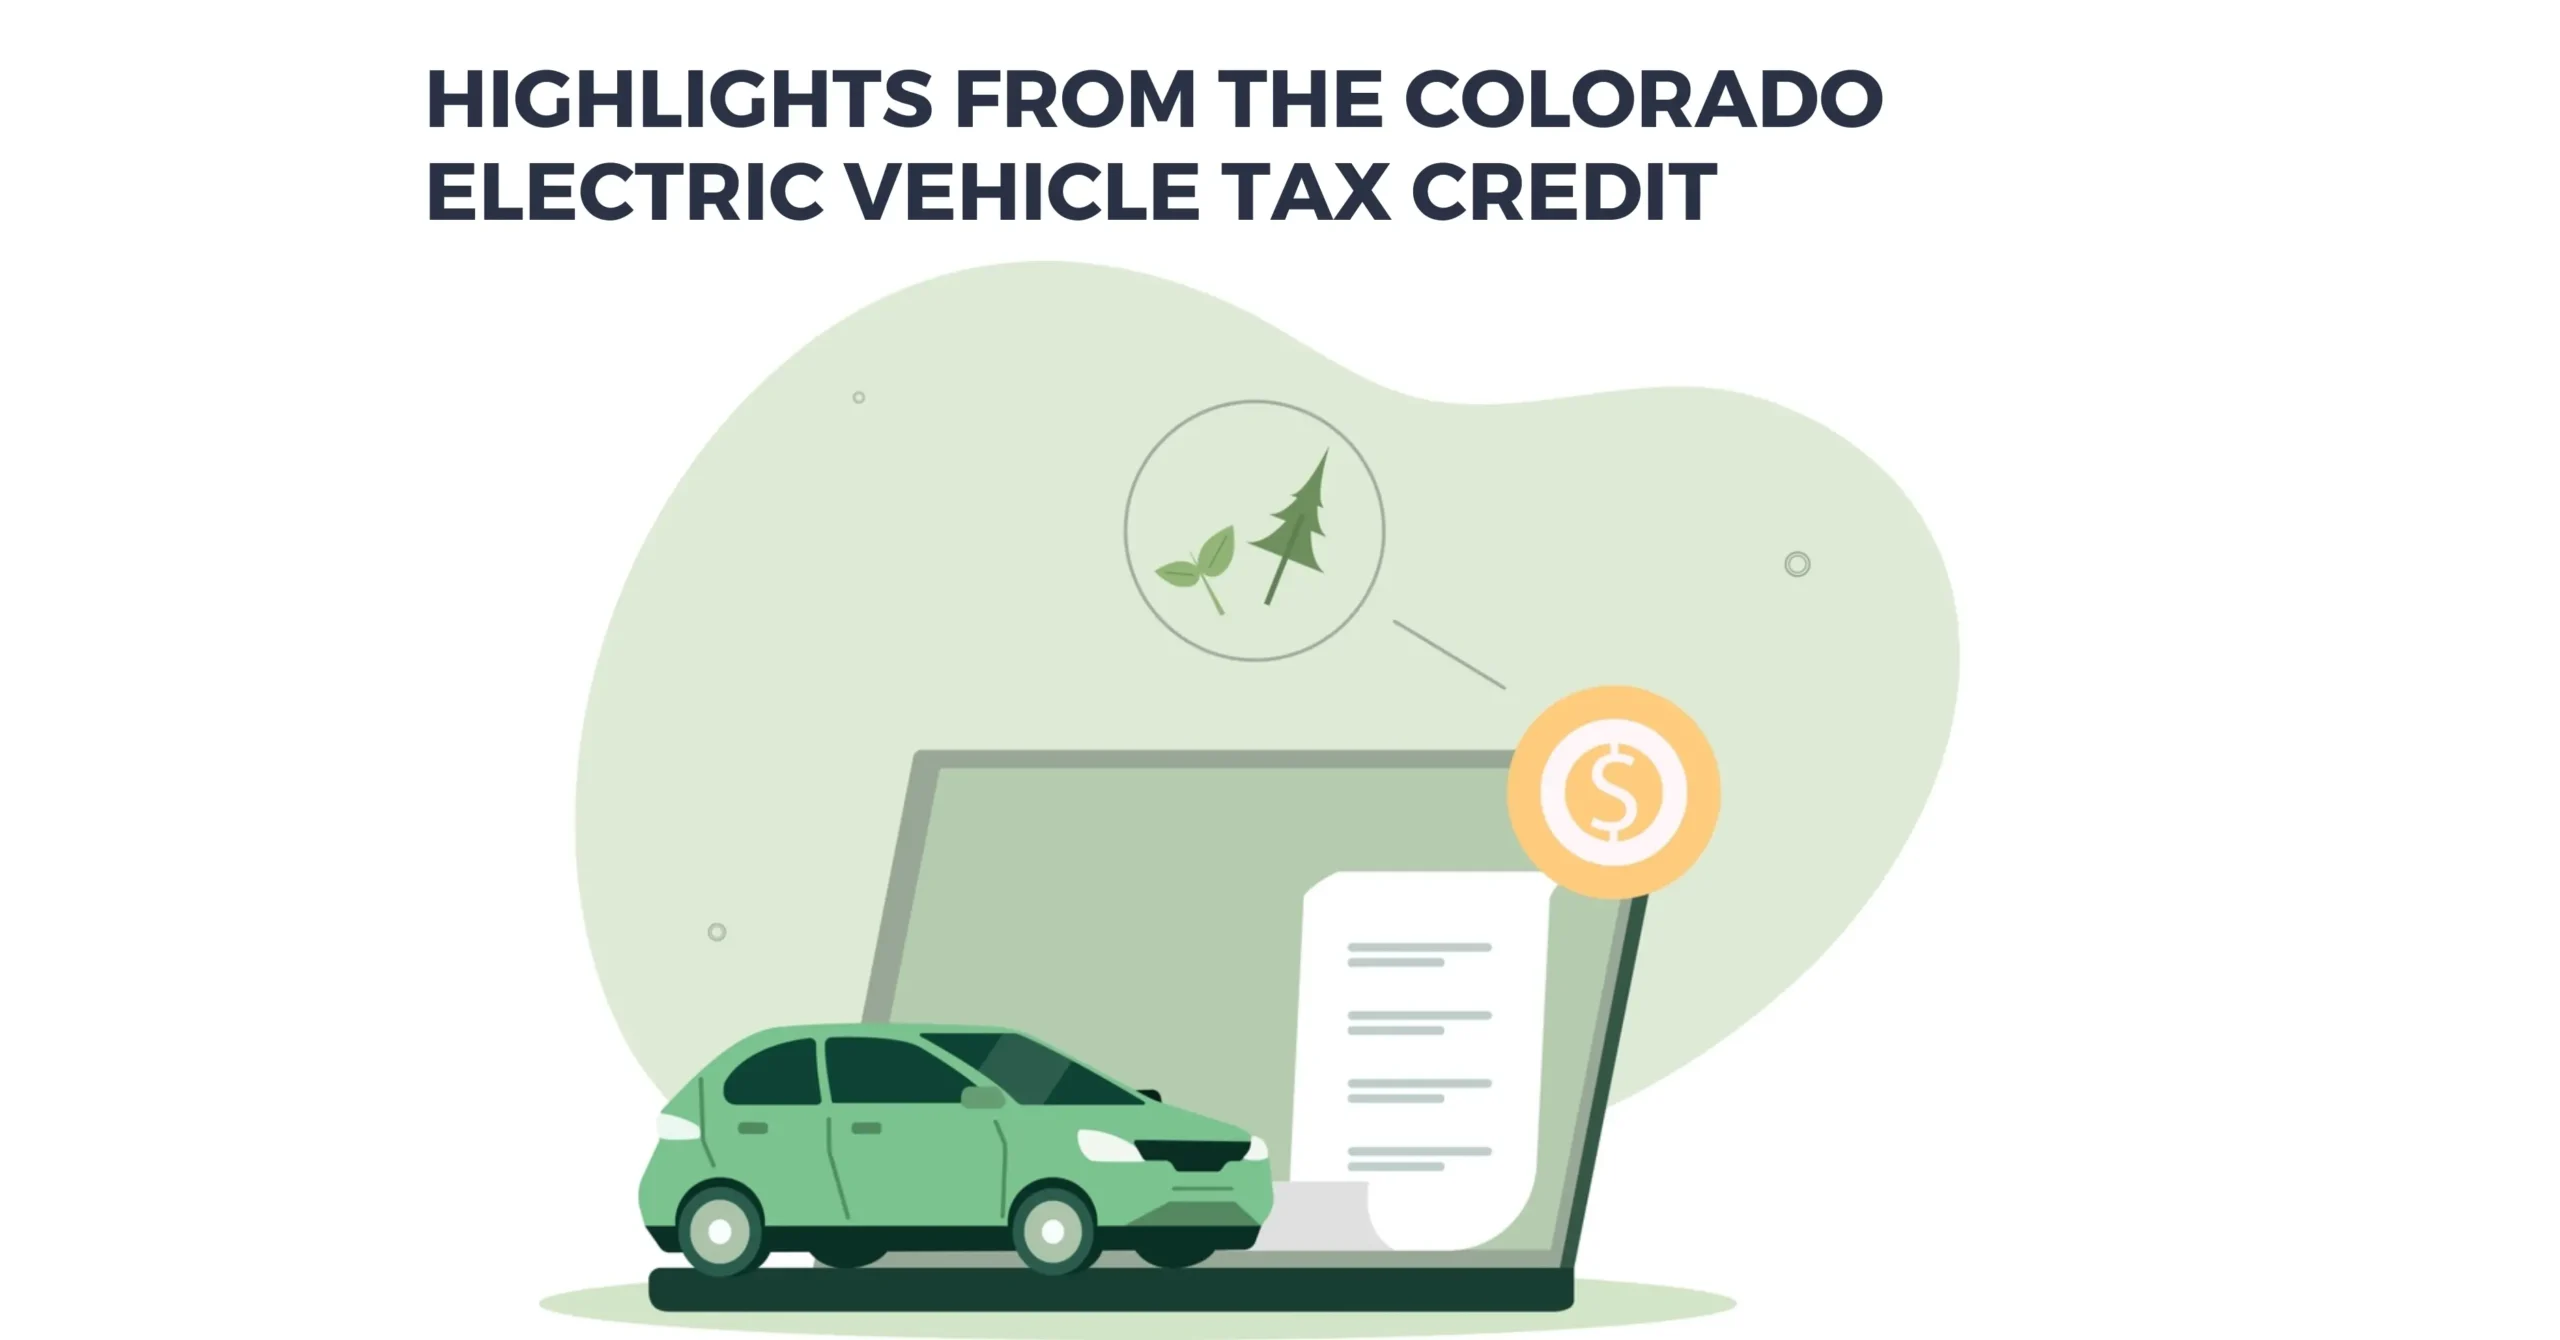 Highlights from the Colorado Electric Vehicle Tax Credit